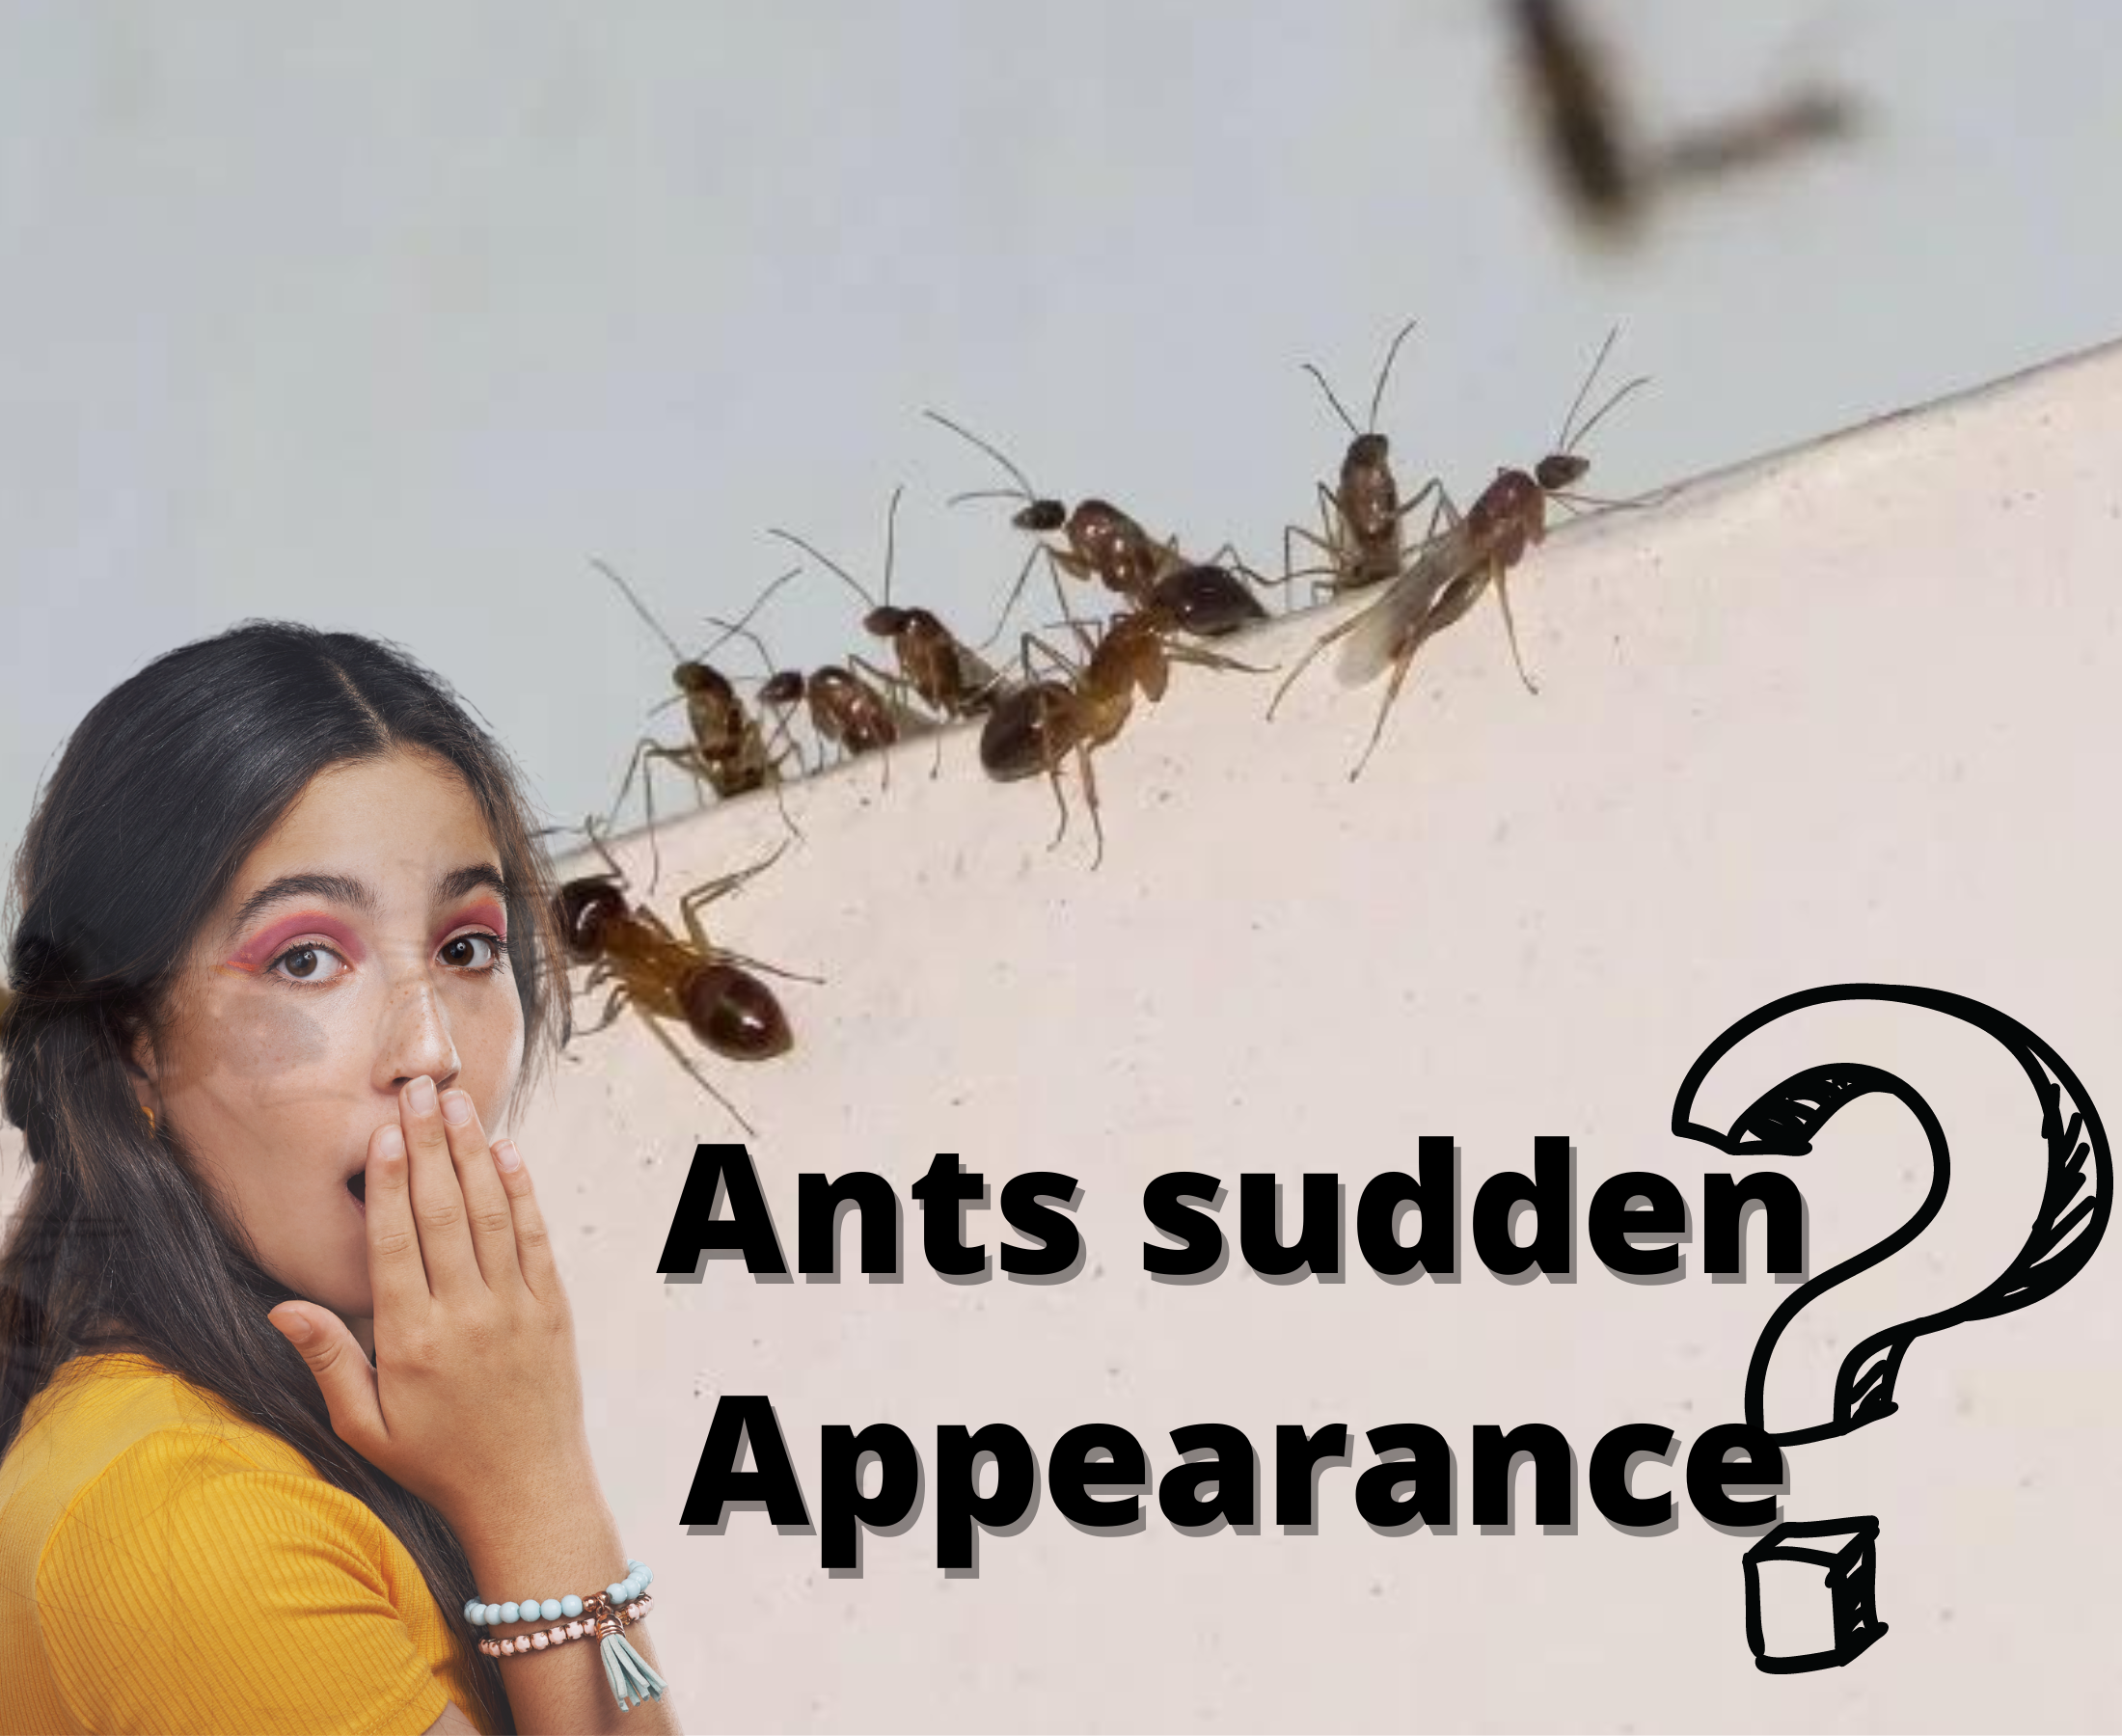 Why do ants suddenly appear in the house?